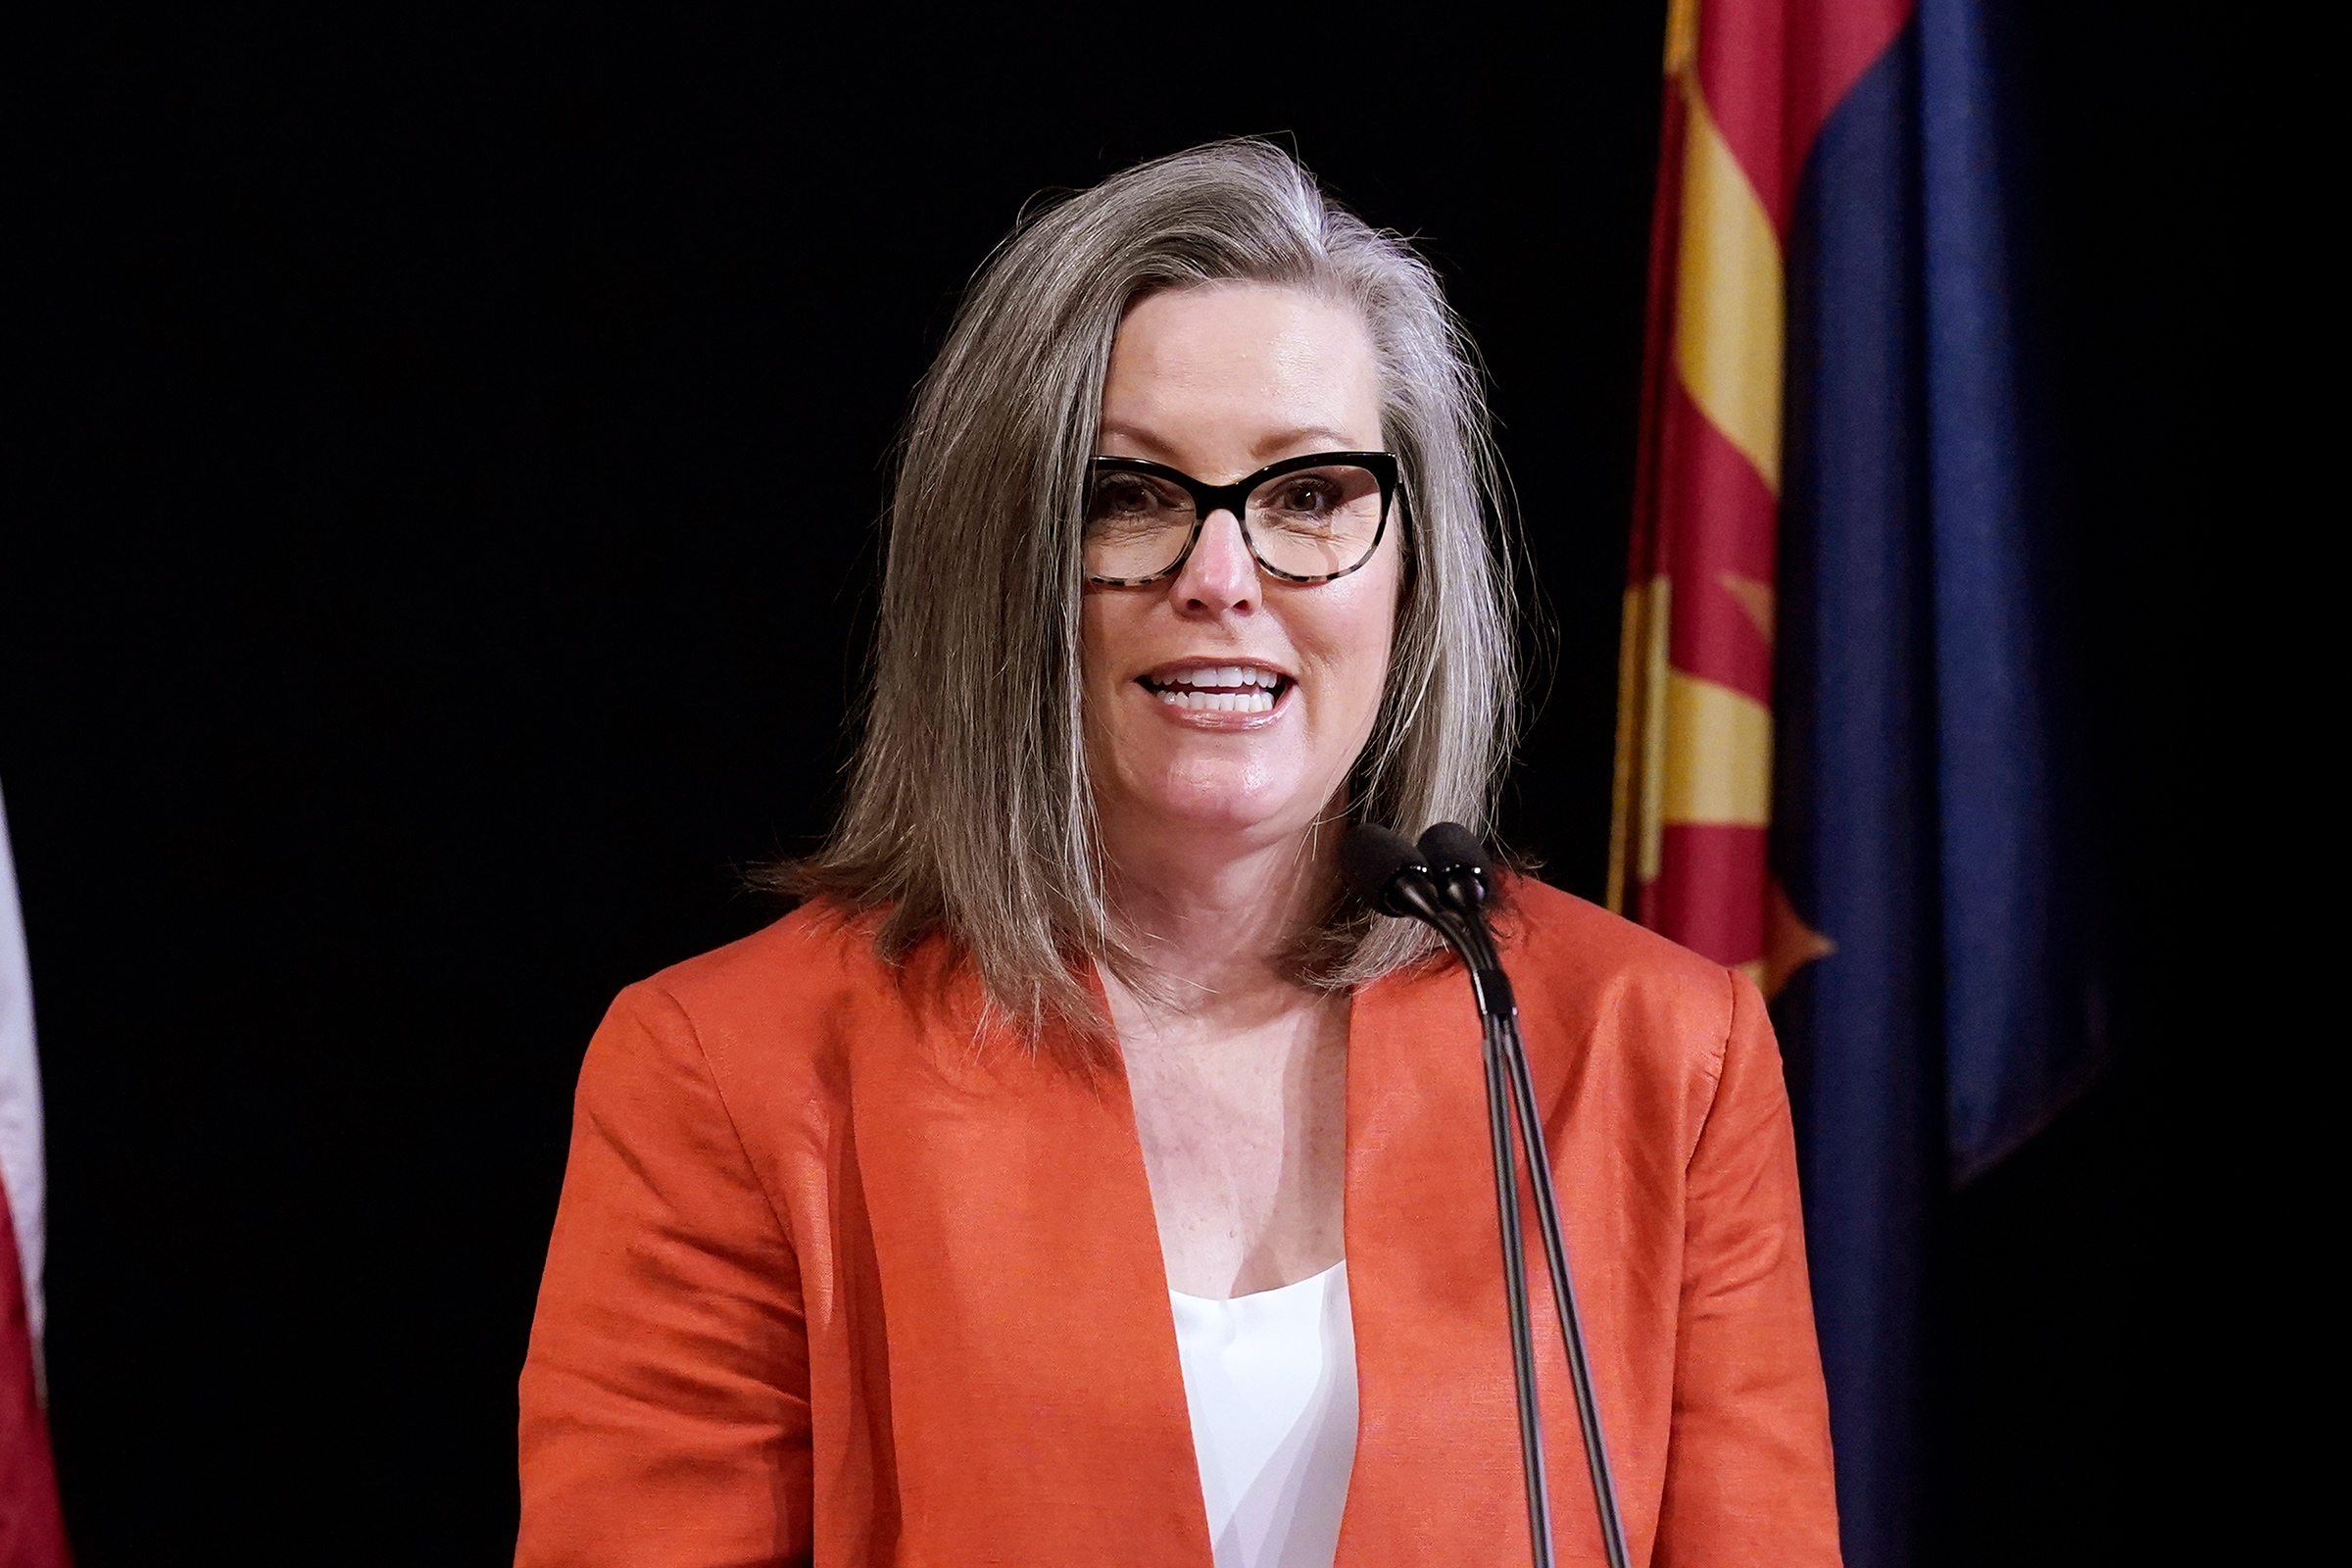 Arizona Secretary of State Katie Hobbs addresses the members of Arizona's Electoral College in Phoenix. Hobbs on Wednesday, June 2, 2021, announced her candidacy for the Democratic nomination for governor in 2022 while denouncing the Republican-controlled state Senate's ongoing audit of the 2020 presidential election. (Ross D. Franklin—AP)